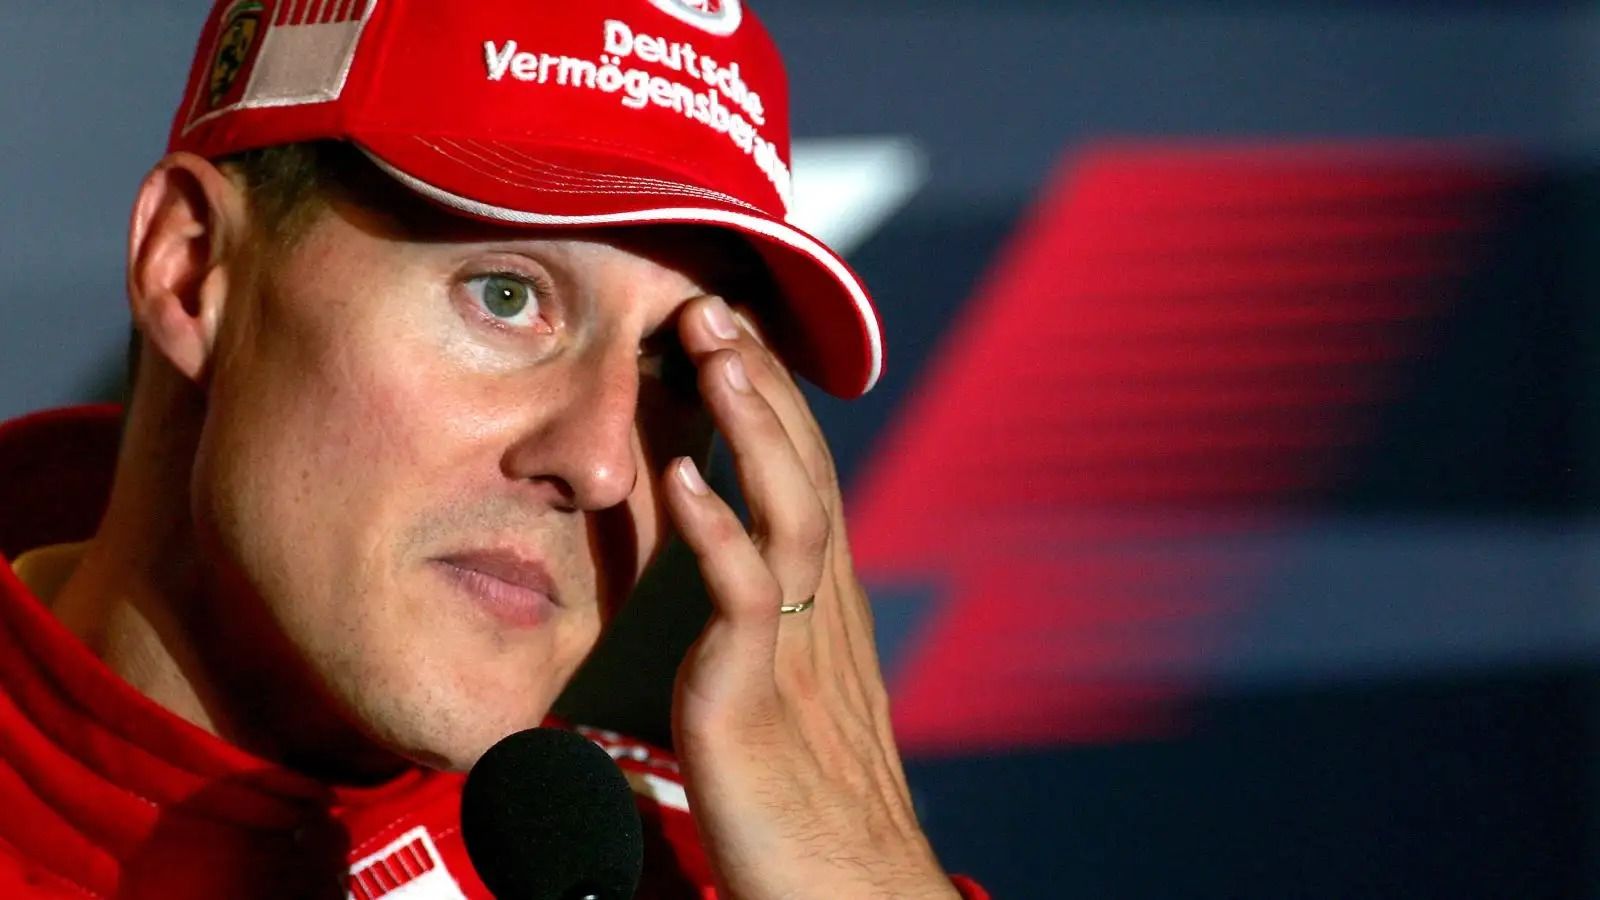 Michael Schumacher's Brother Gives Health Update On Racing Legend